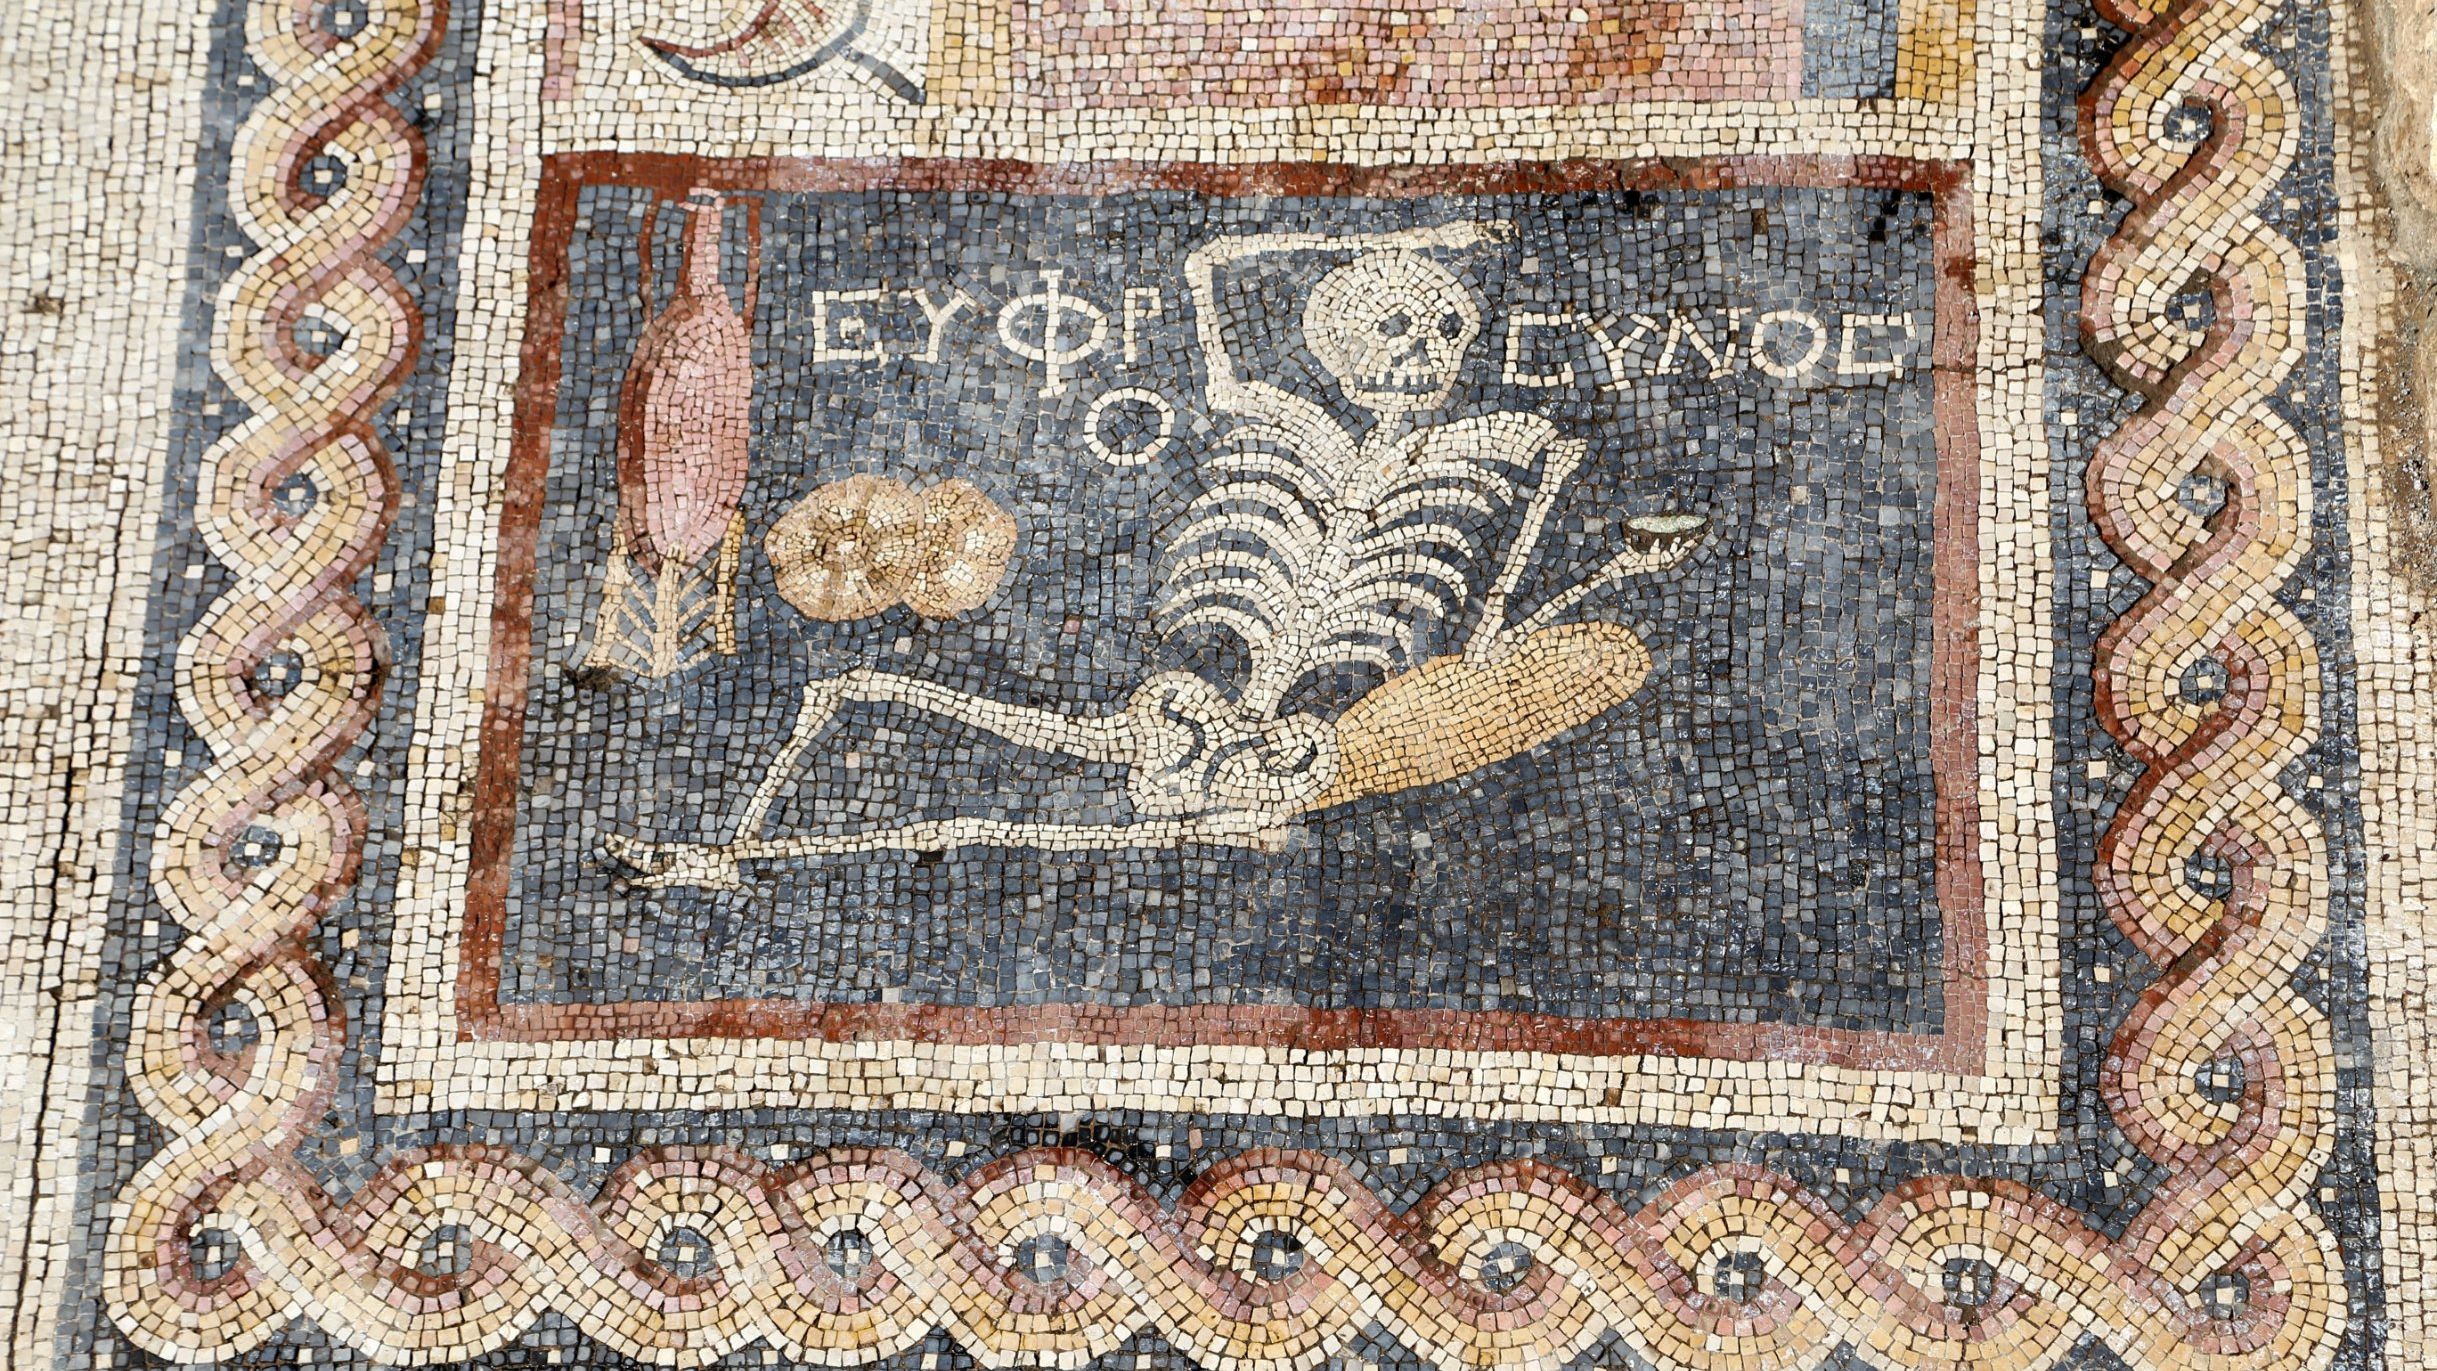 A skeleton on a 2,400-year-old mosaic found in Turkey advises "Be cheerful, enjoy your life."
